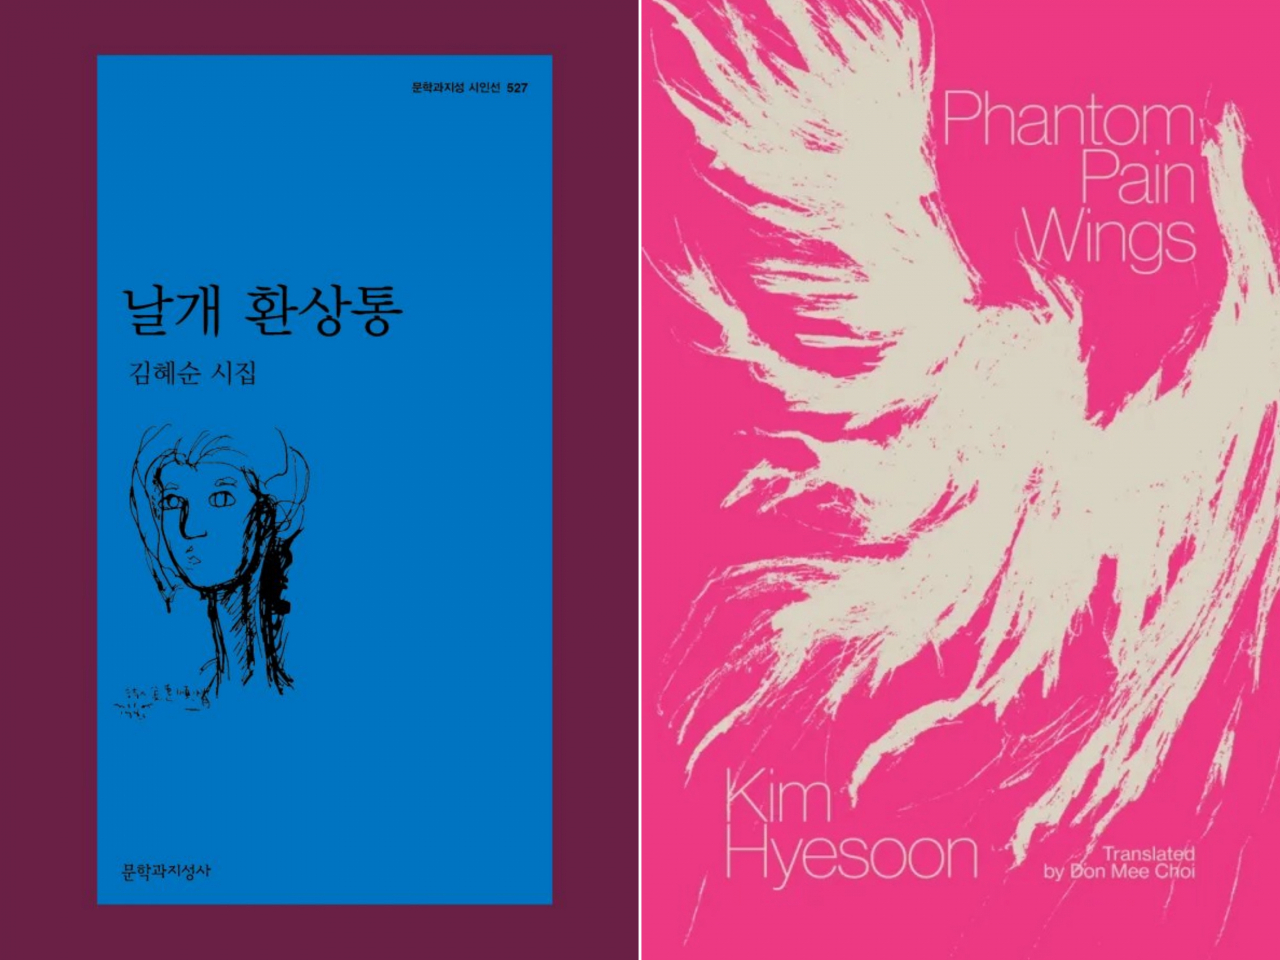 Korean edition (left) and English edition of 